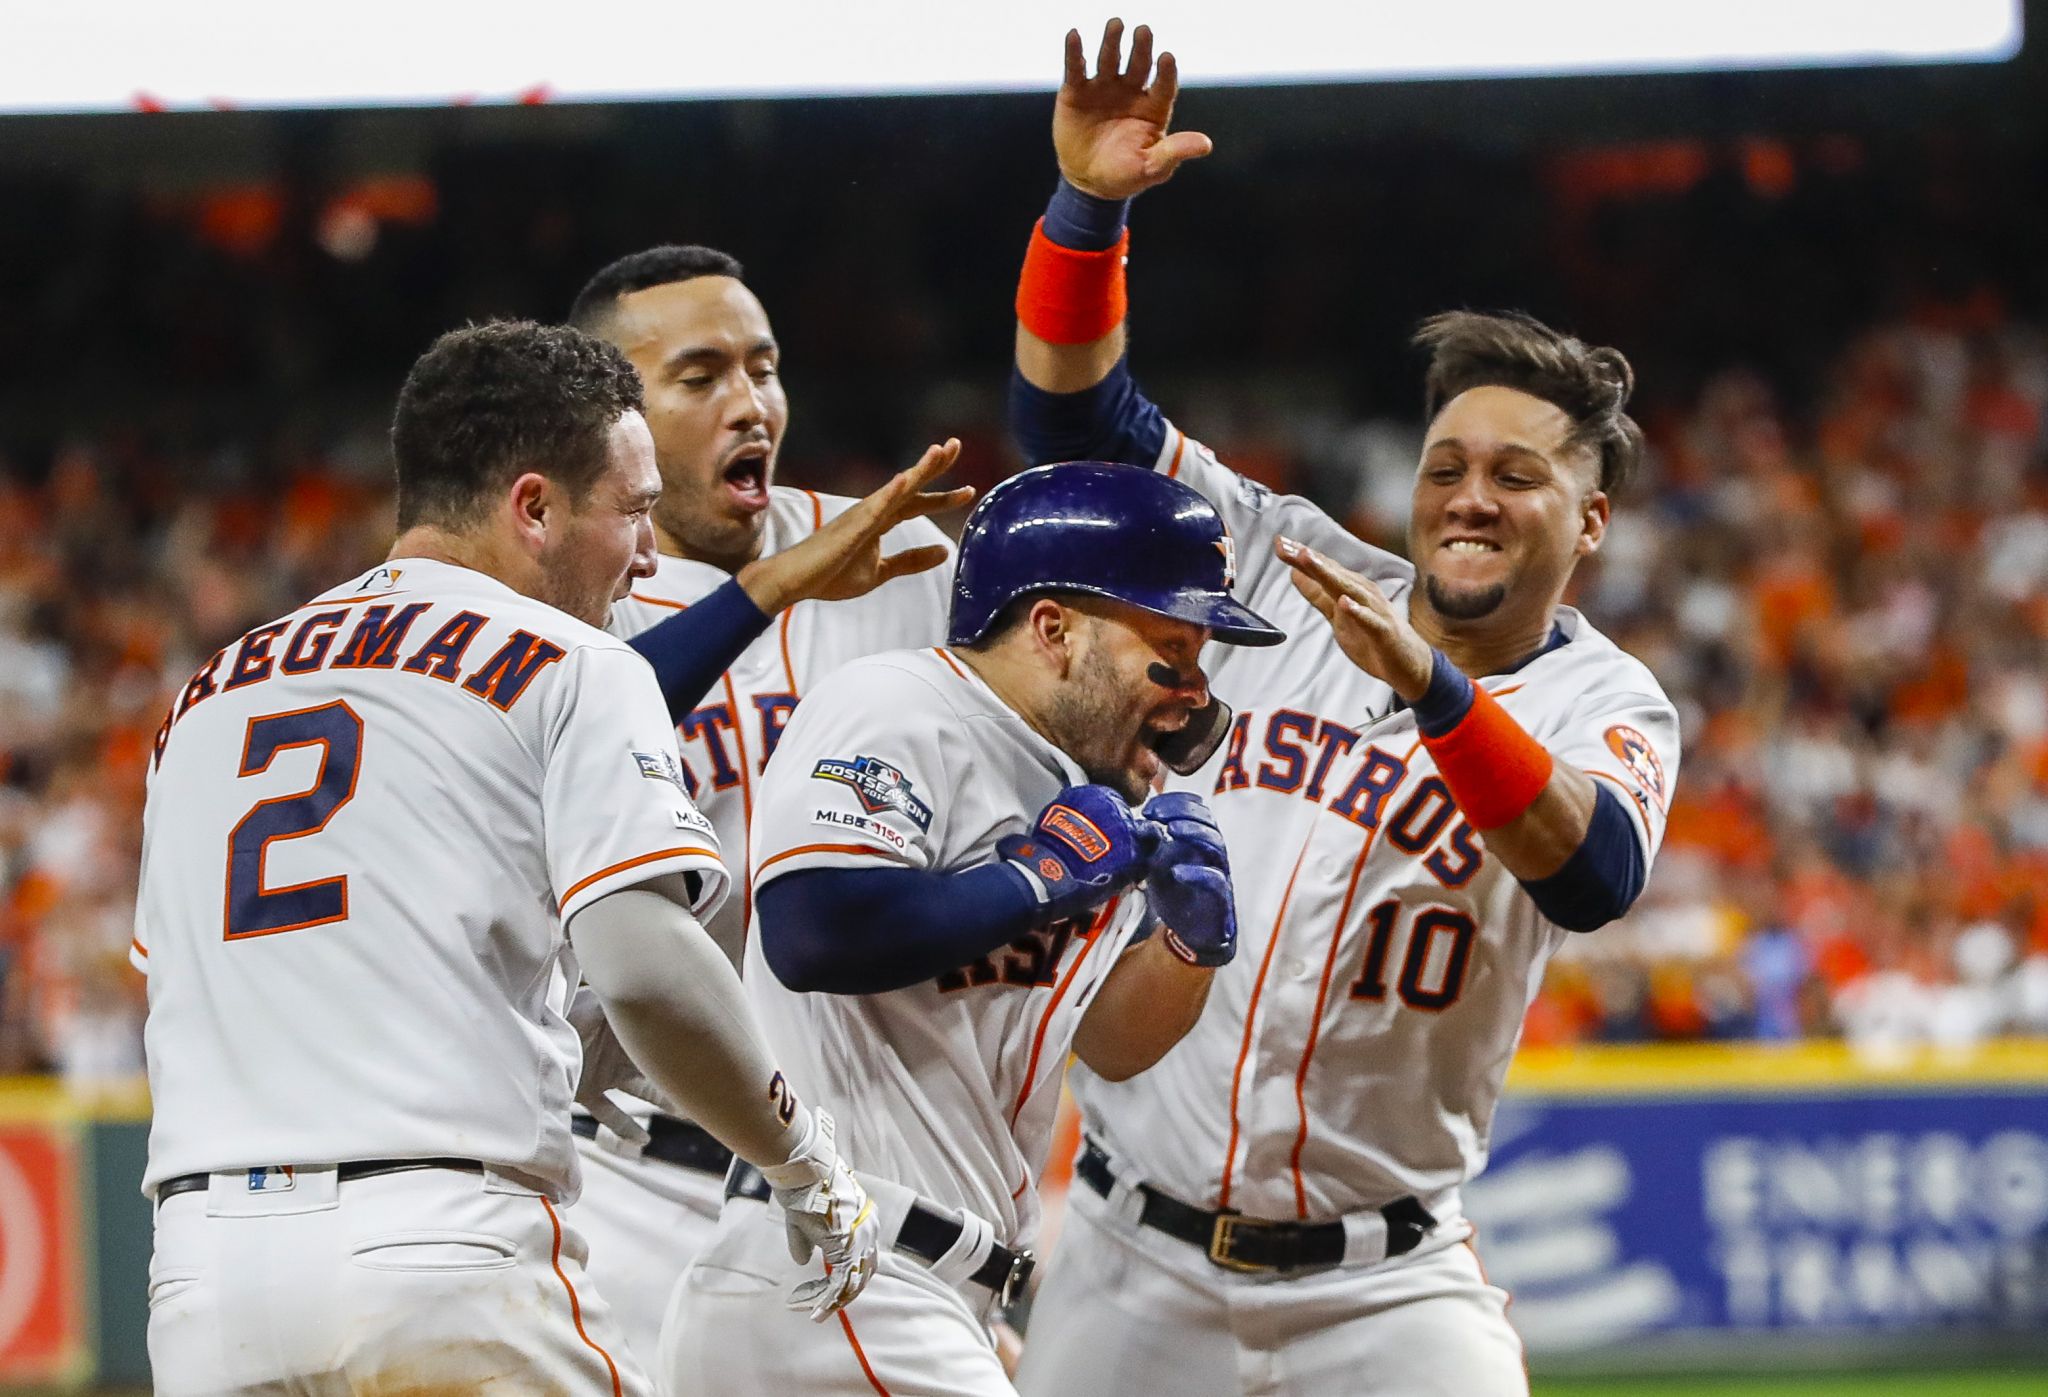 Elation and heartbreak: The Astros' history in Game 6 of playoff series